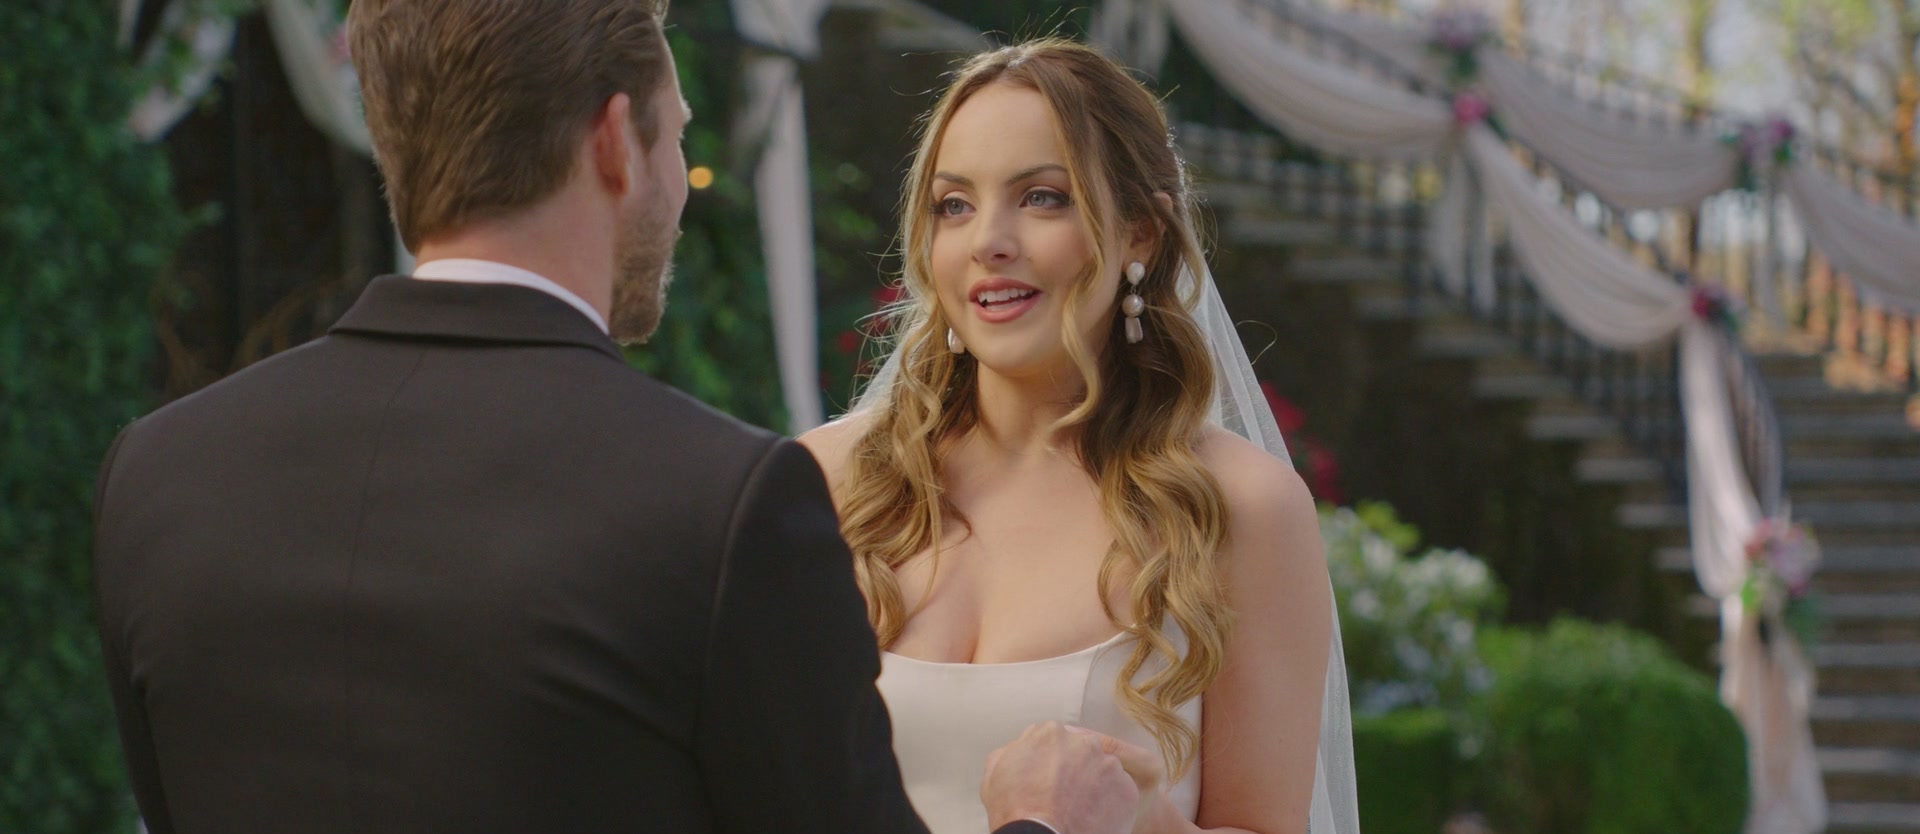 Dynasty: 4.02 – “Vows Are Still Sacred” Screen Captures